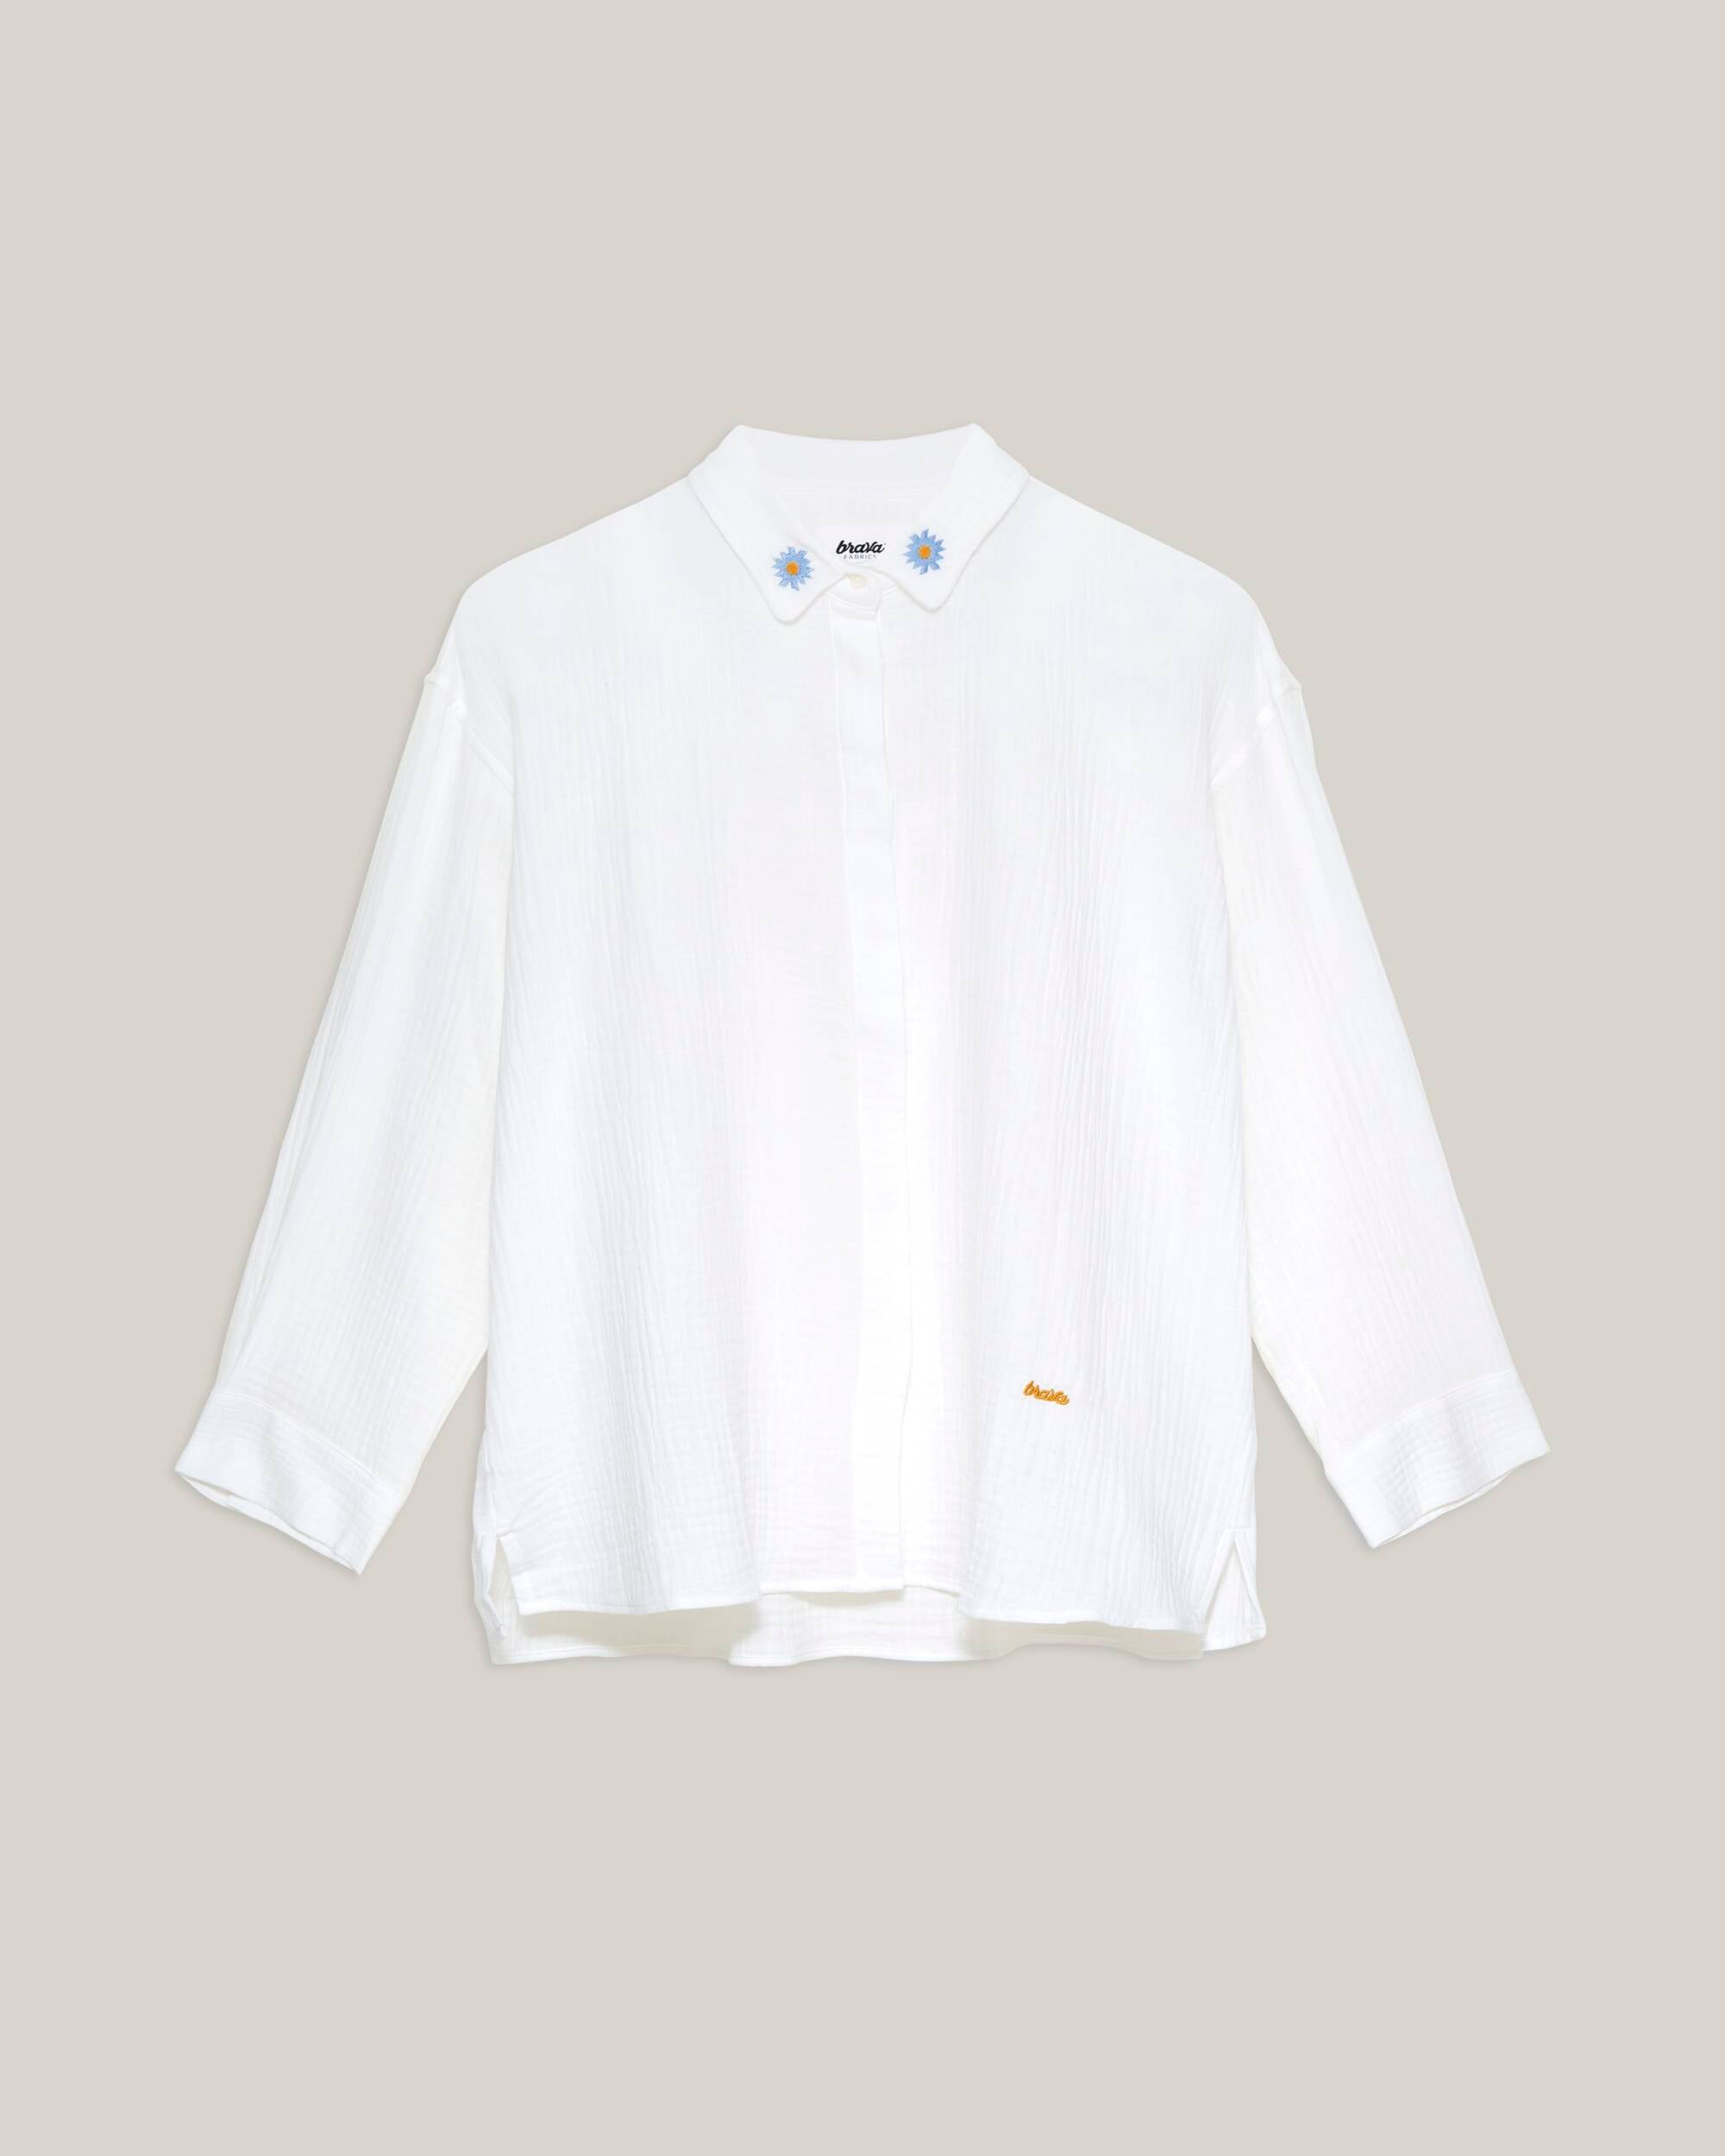 White, long-sleeved blouse Pure White made from 100% organic cotton from Brava Fabrics